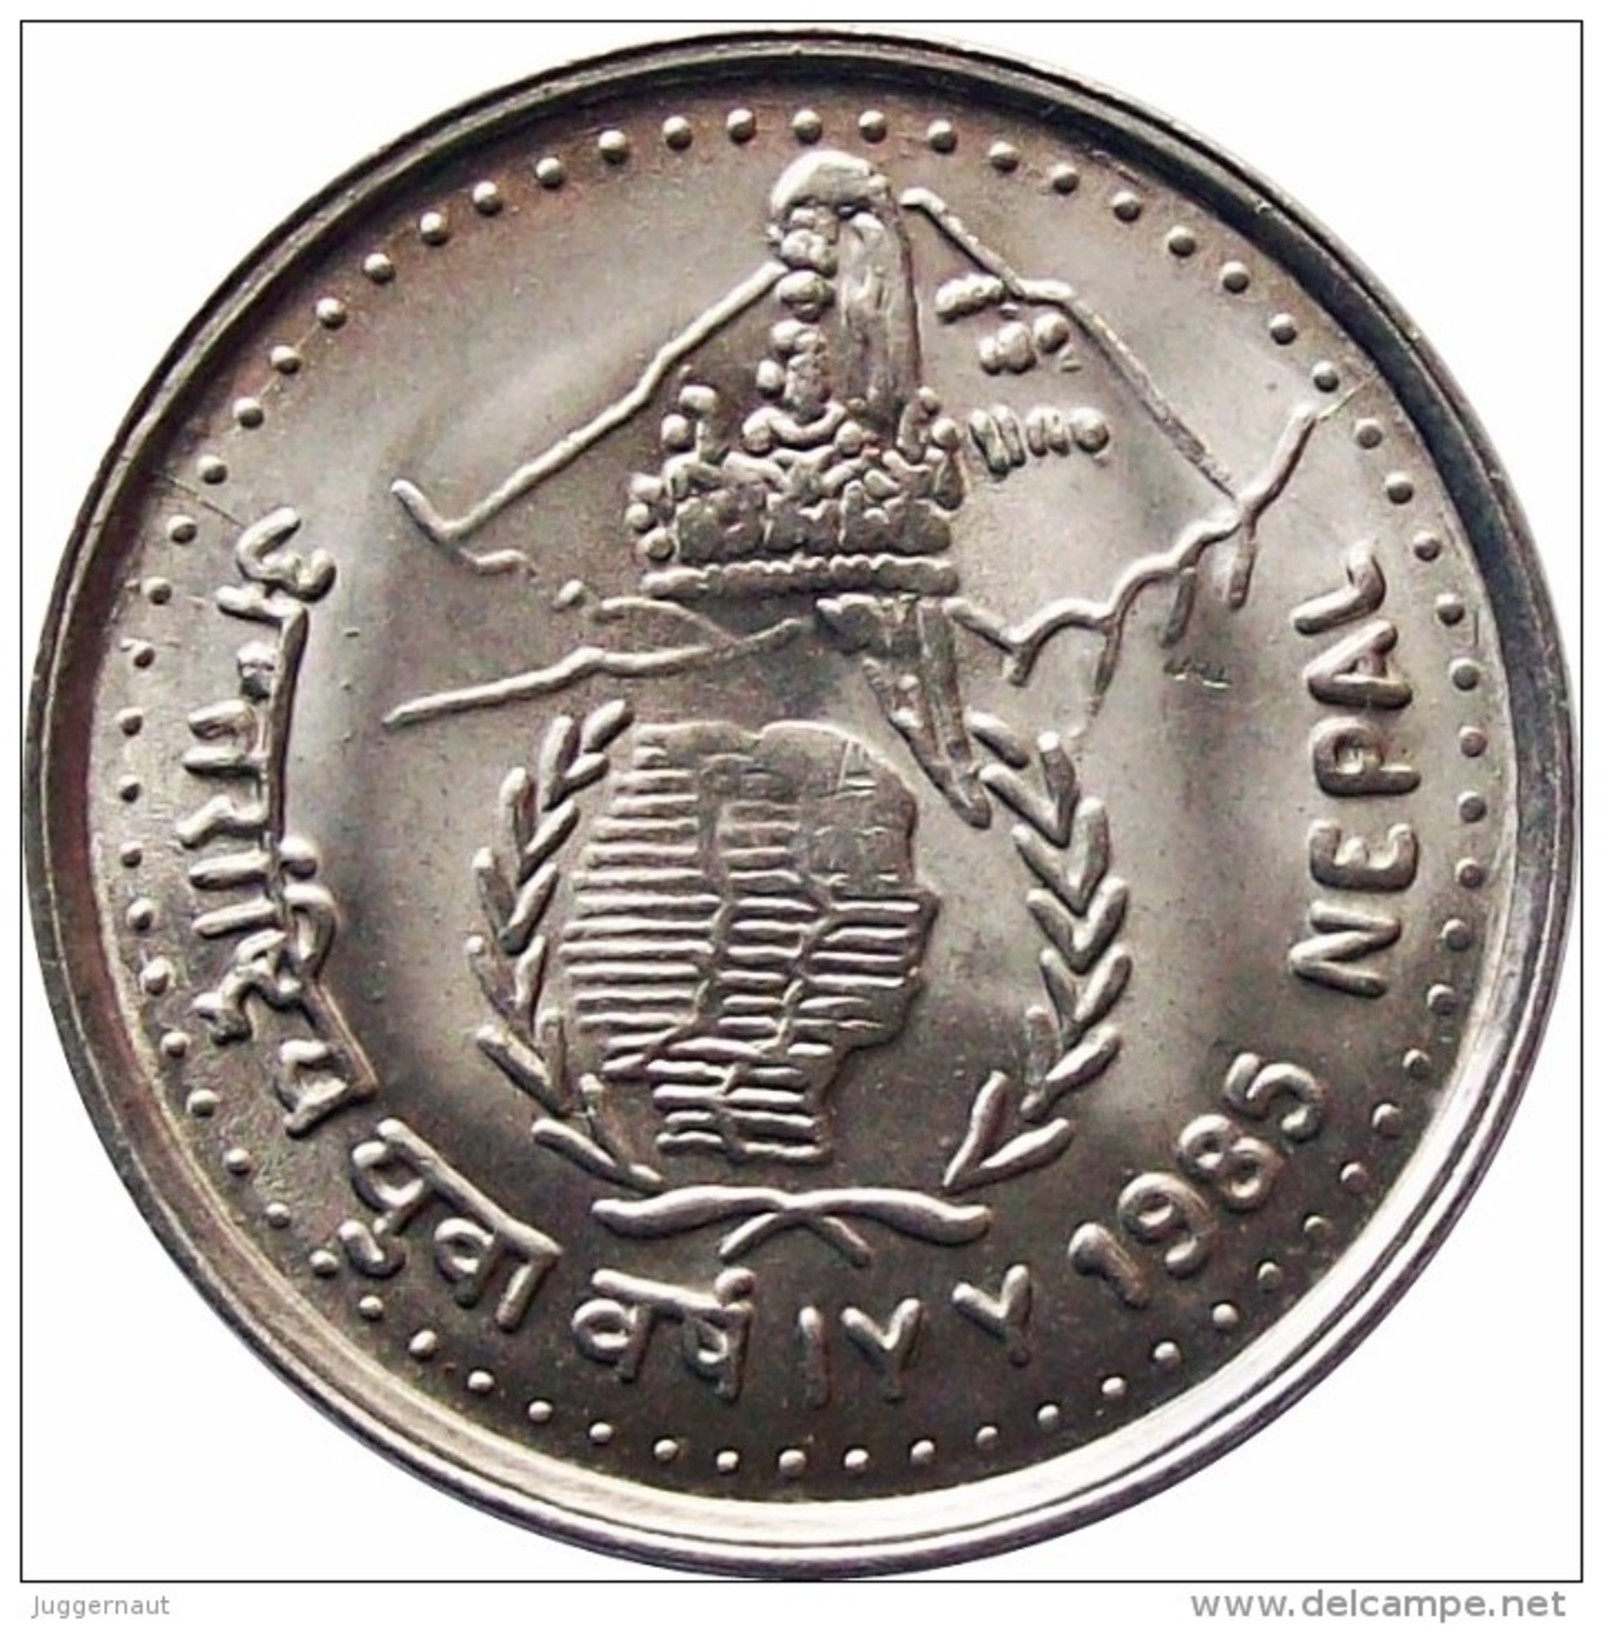 INTERNATIONAL YOUTH YEAR COMMEMORATIVE COIN NEPAL 1985 KM-1023 UNCIRCULATED UNC - Népal